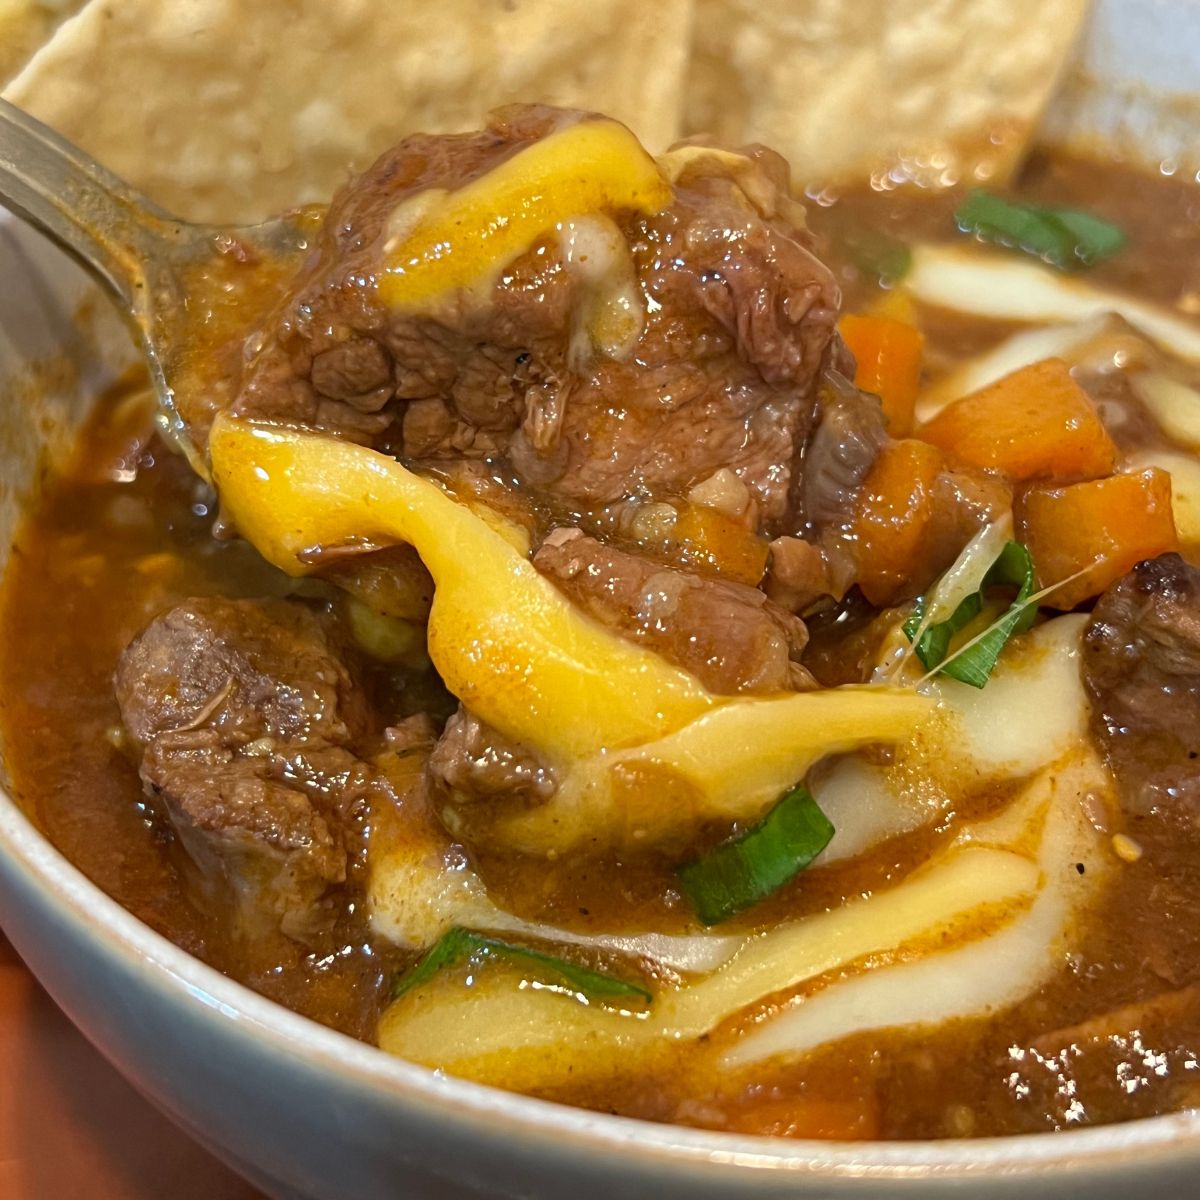 Keto chili con carne in a white bowl with Tostito chips